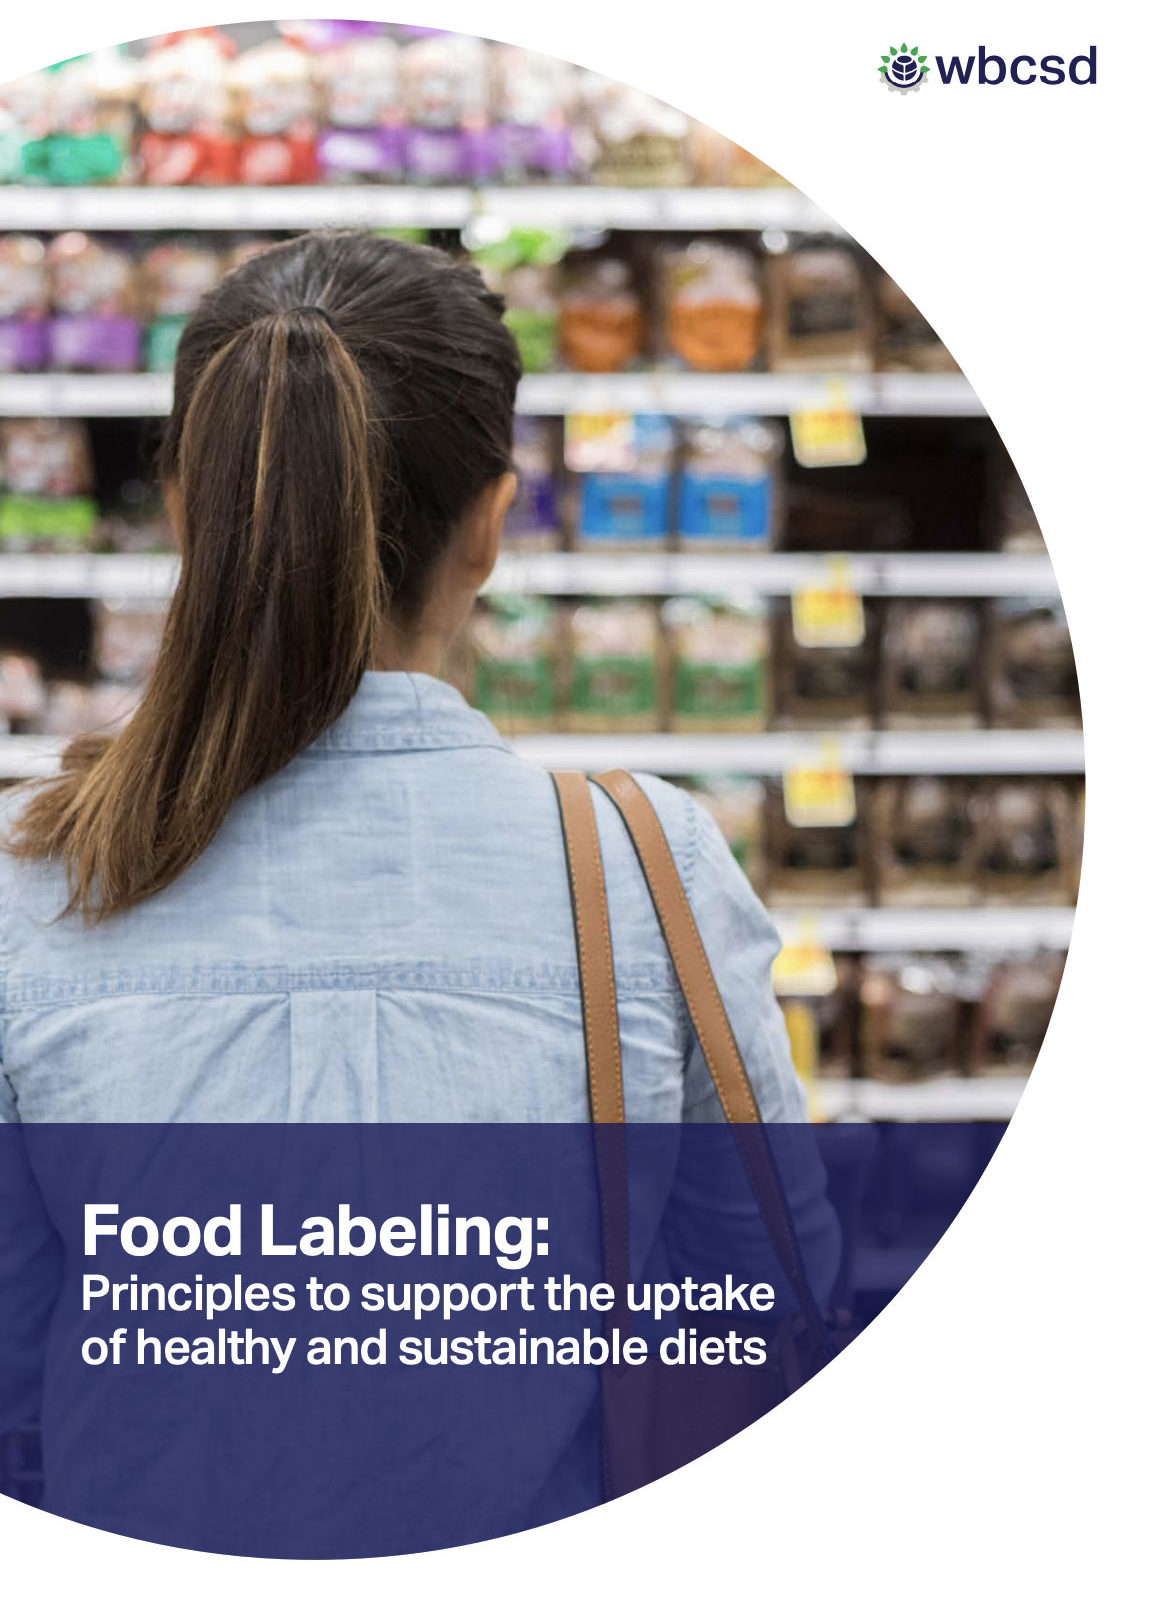 Food Labeling: Principles to support the uptake of healthy and sustainable diets